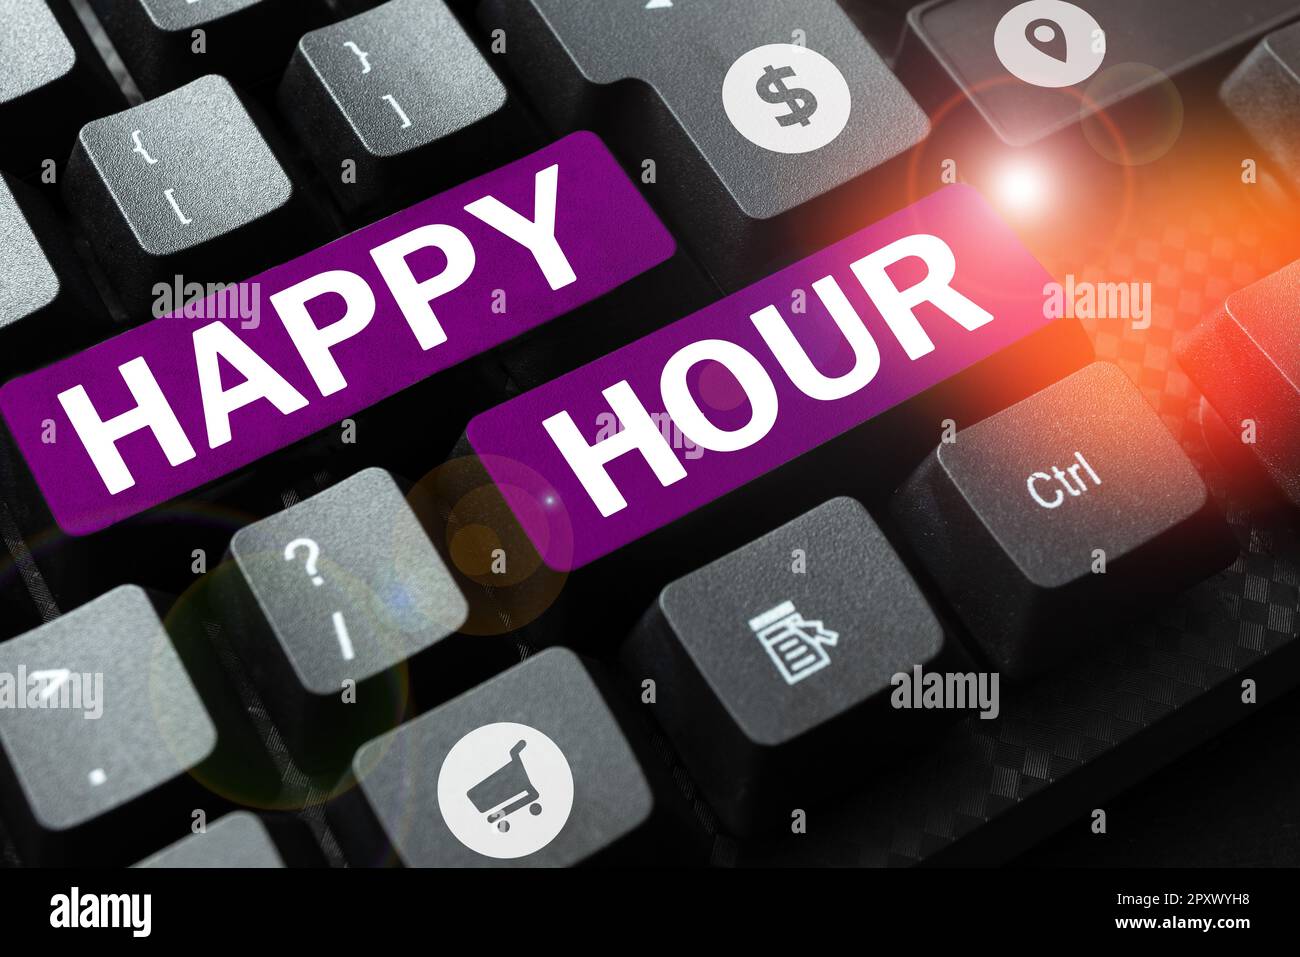 Handwriting text Happy Hour, Business idea Spending time for activities that makes you relax for a while Stock Photo